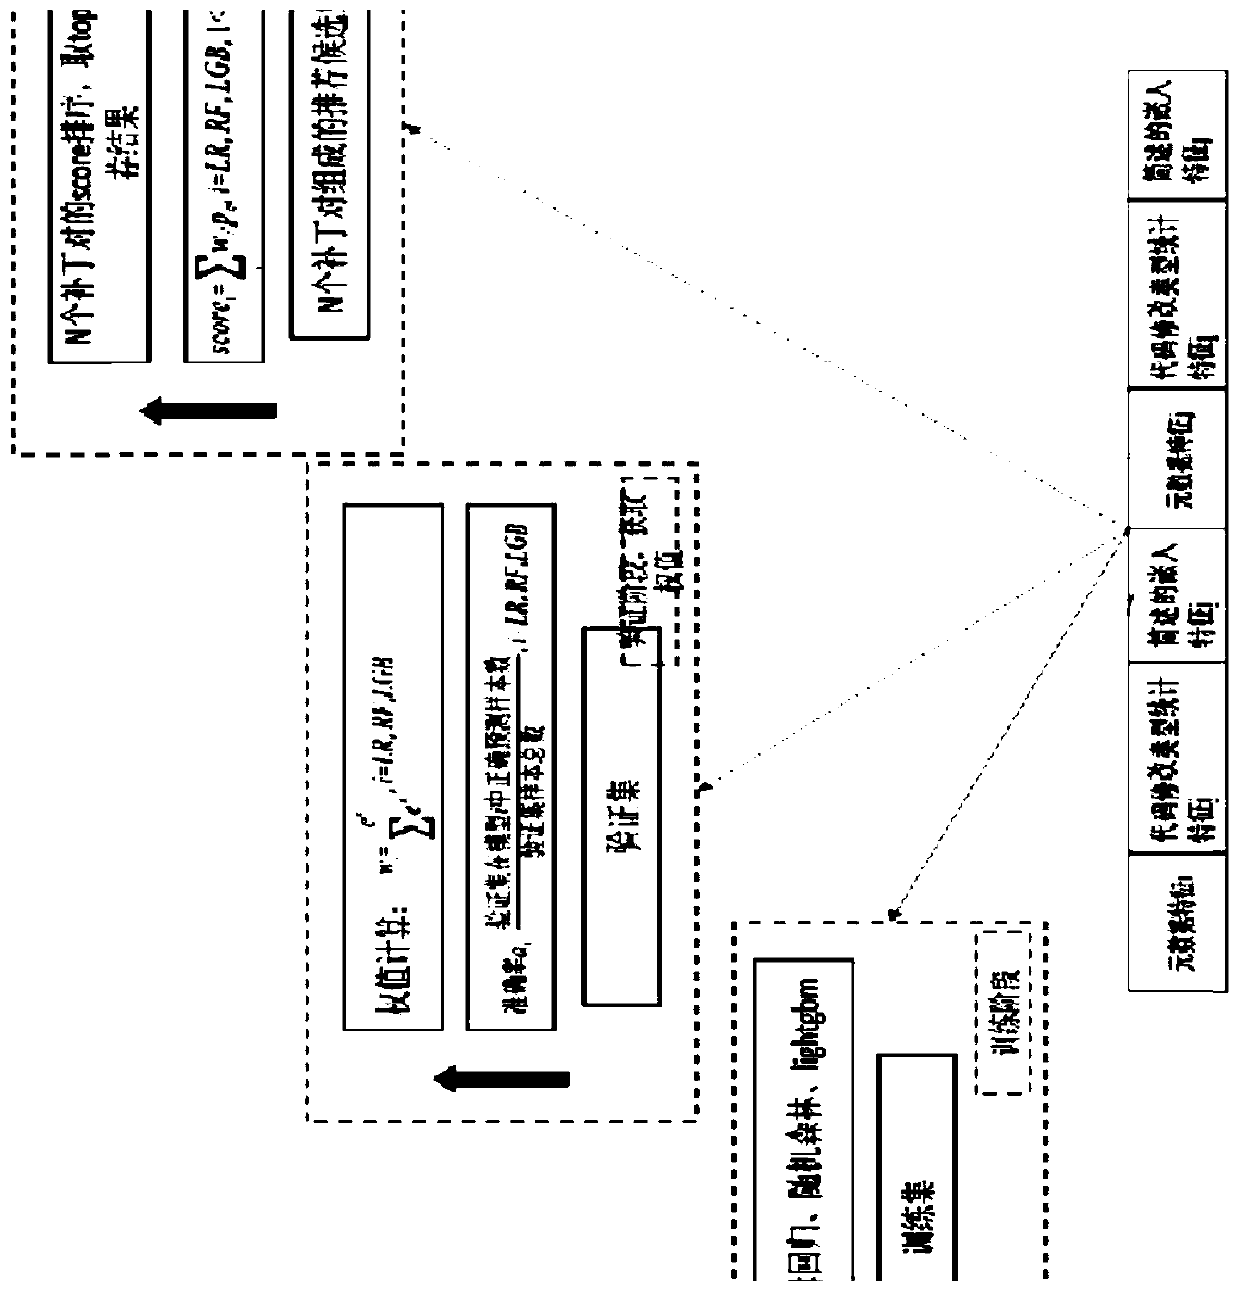 Related patch recommendation method based on heterogeneous data